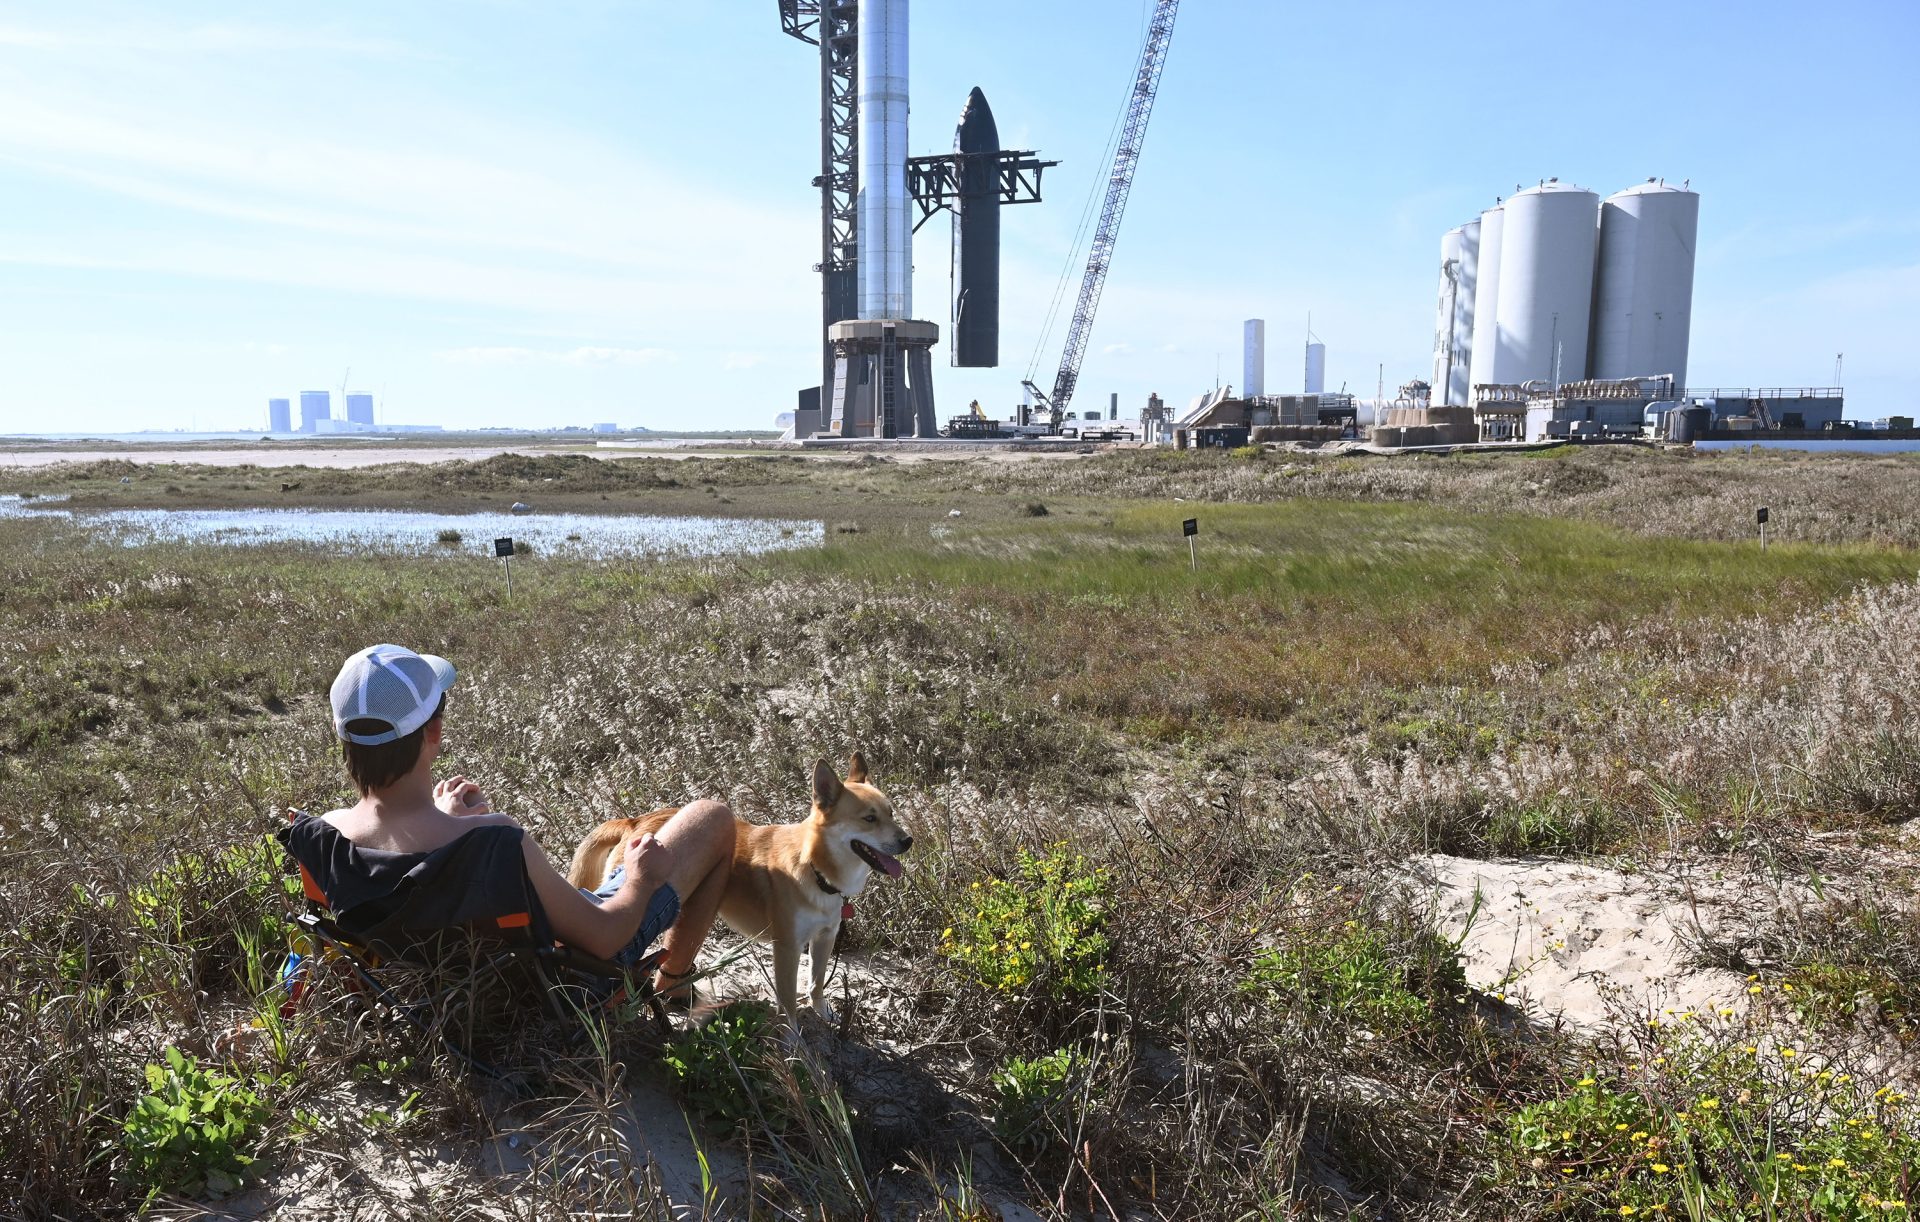 Amid opposition, Texas officials to vote on state park land swap with SpaceX